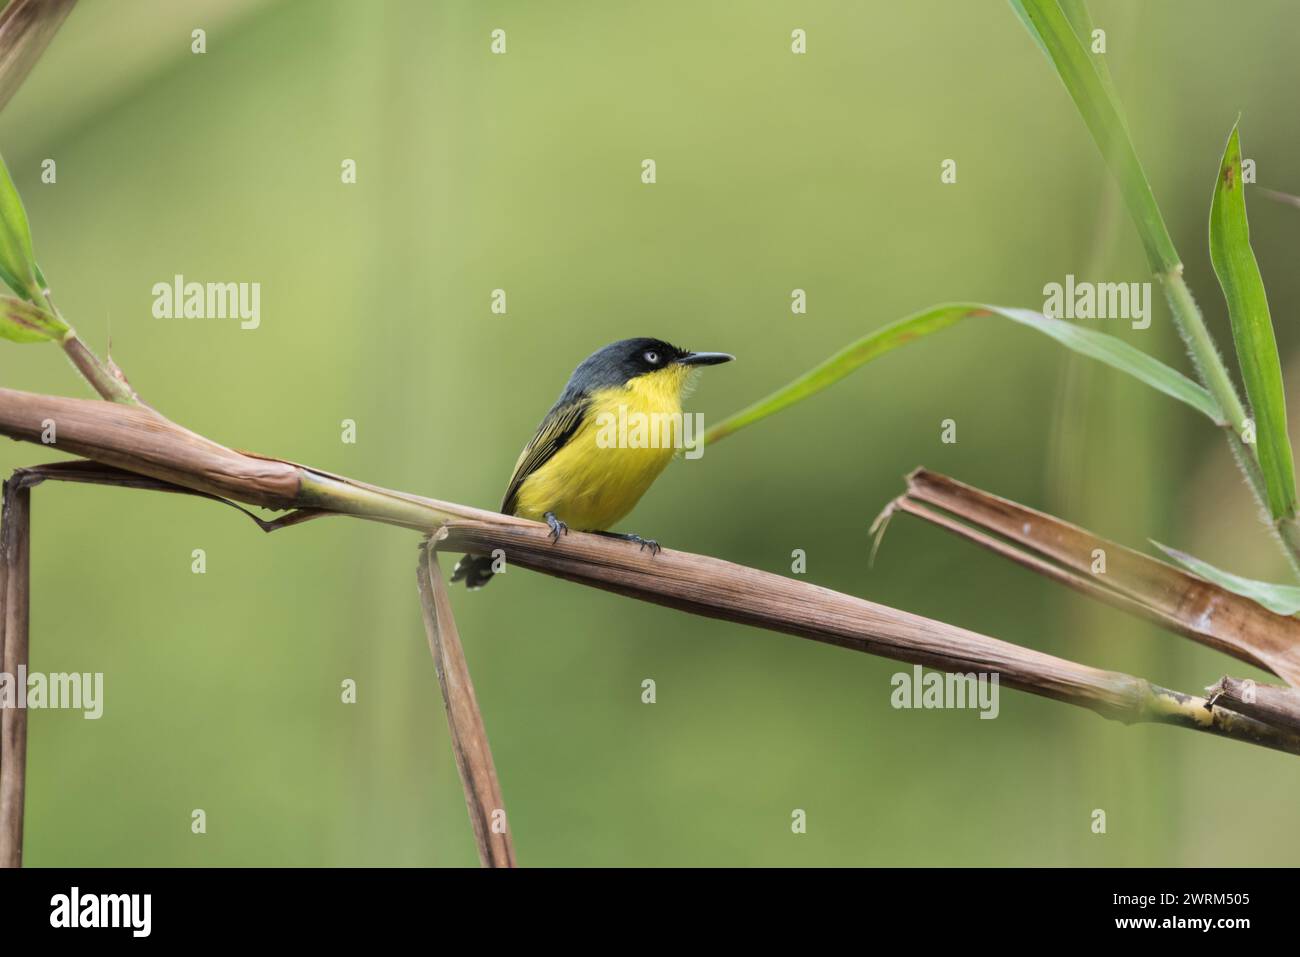 Common Tody-Flycatcher (Todirostrum cinereum) perched in a tree in Colombia Stock Photo